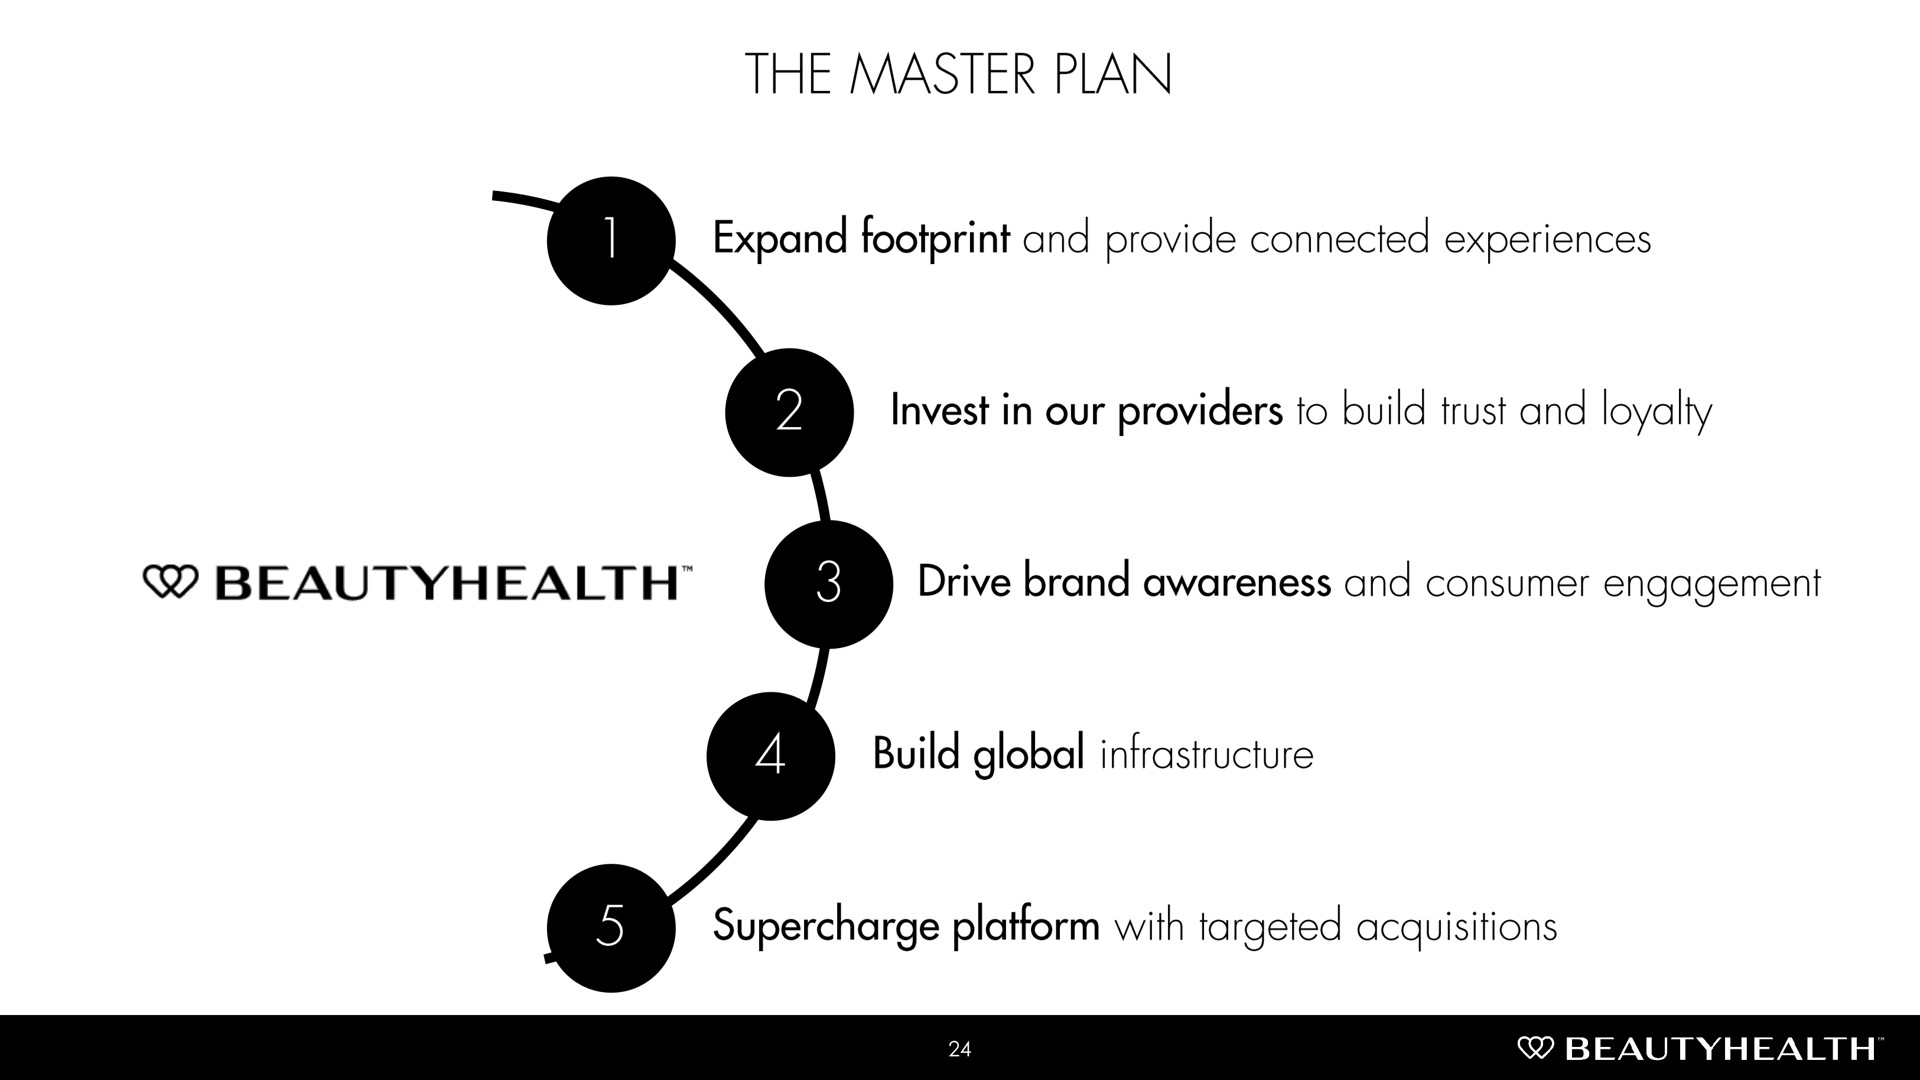 the master plan expand footprint and provide connected experiences invest in our providers to build trust and loyalty drive brand awareness and consumer engagement build global infrastructure supercharge platform with targeted acquisitions | Hydrafacial